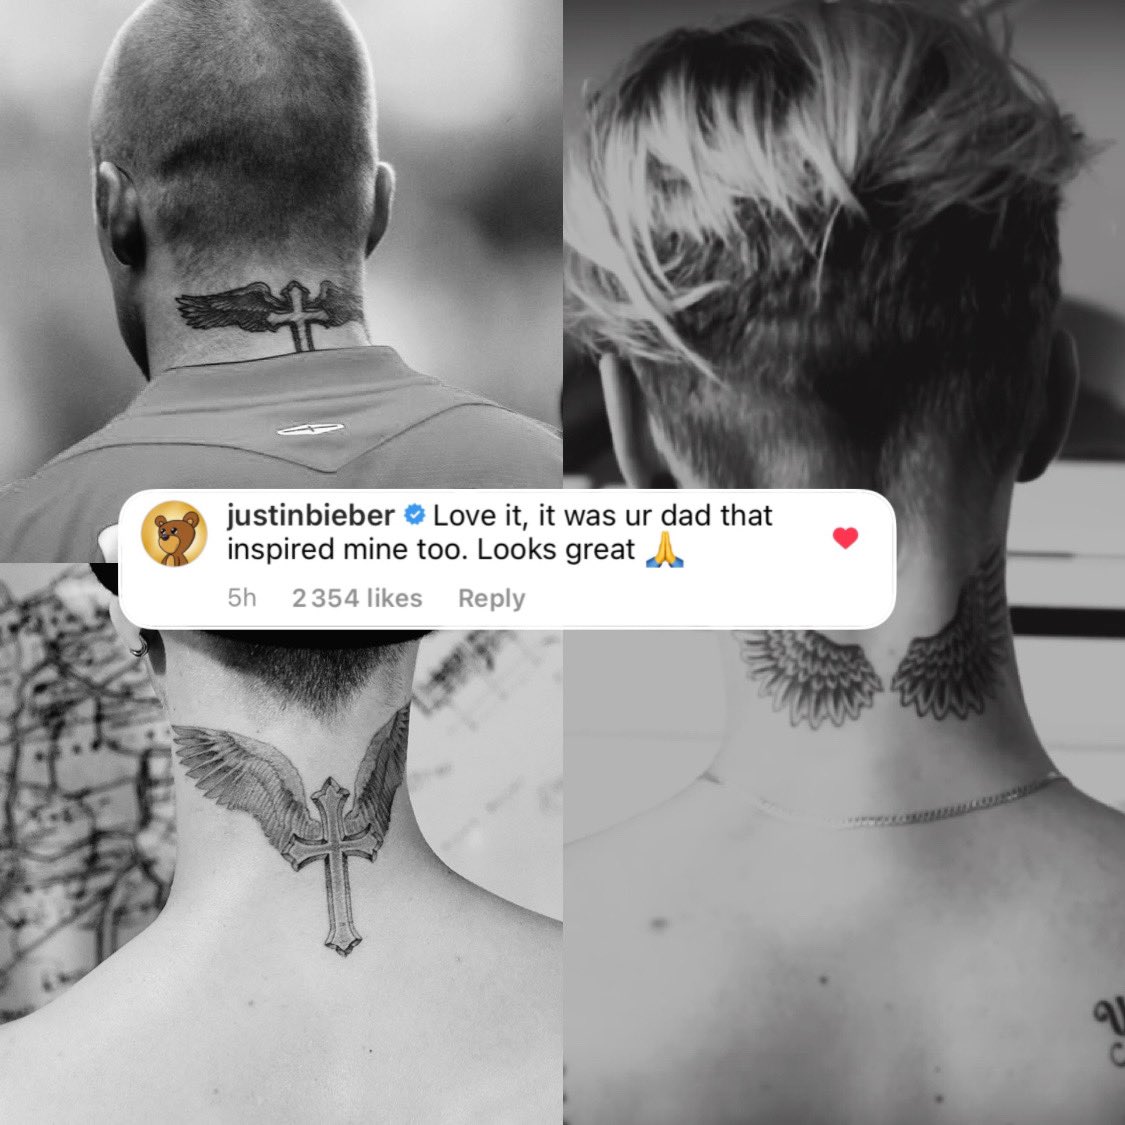 Justin Biebers wings tattoo on the back of his neck